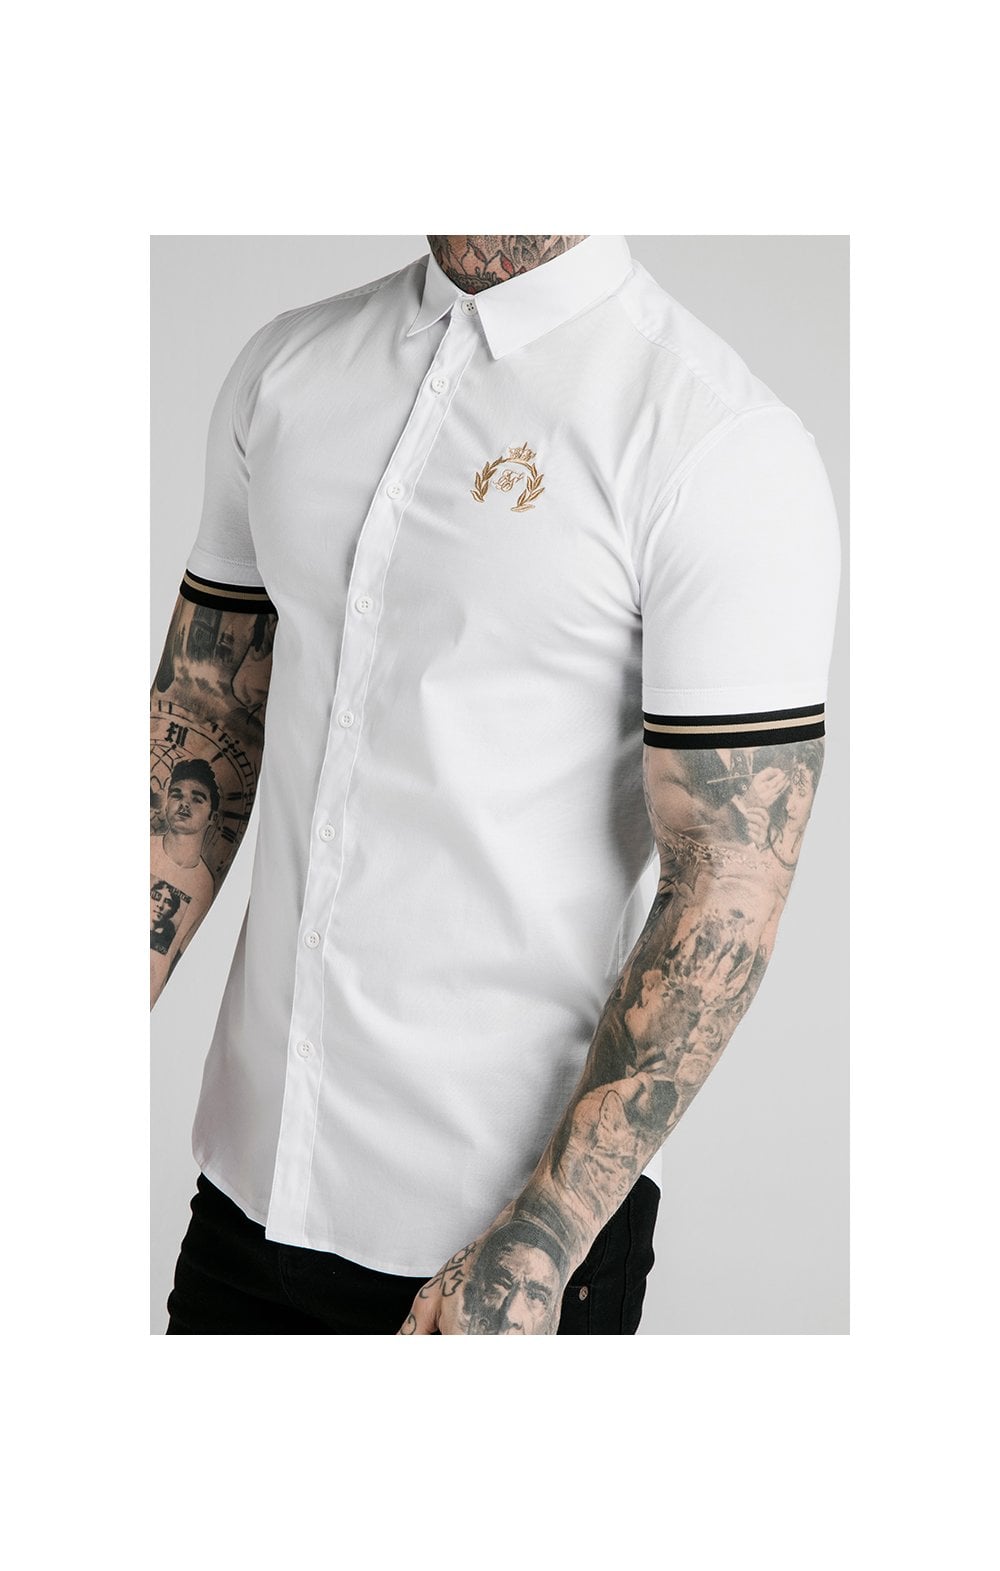 Load image into Gallery viewer, SikSilk S/S Prestige Inset Cuff Shirt - White